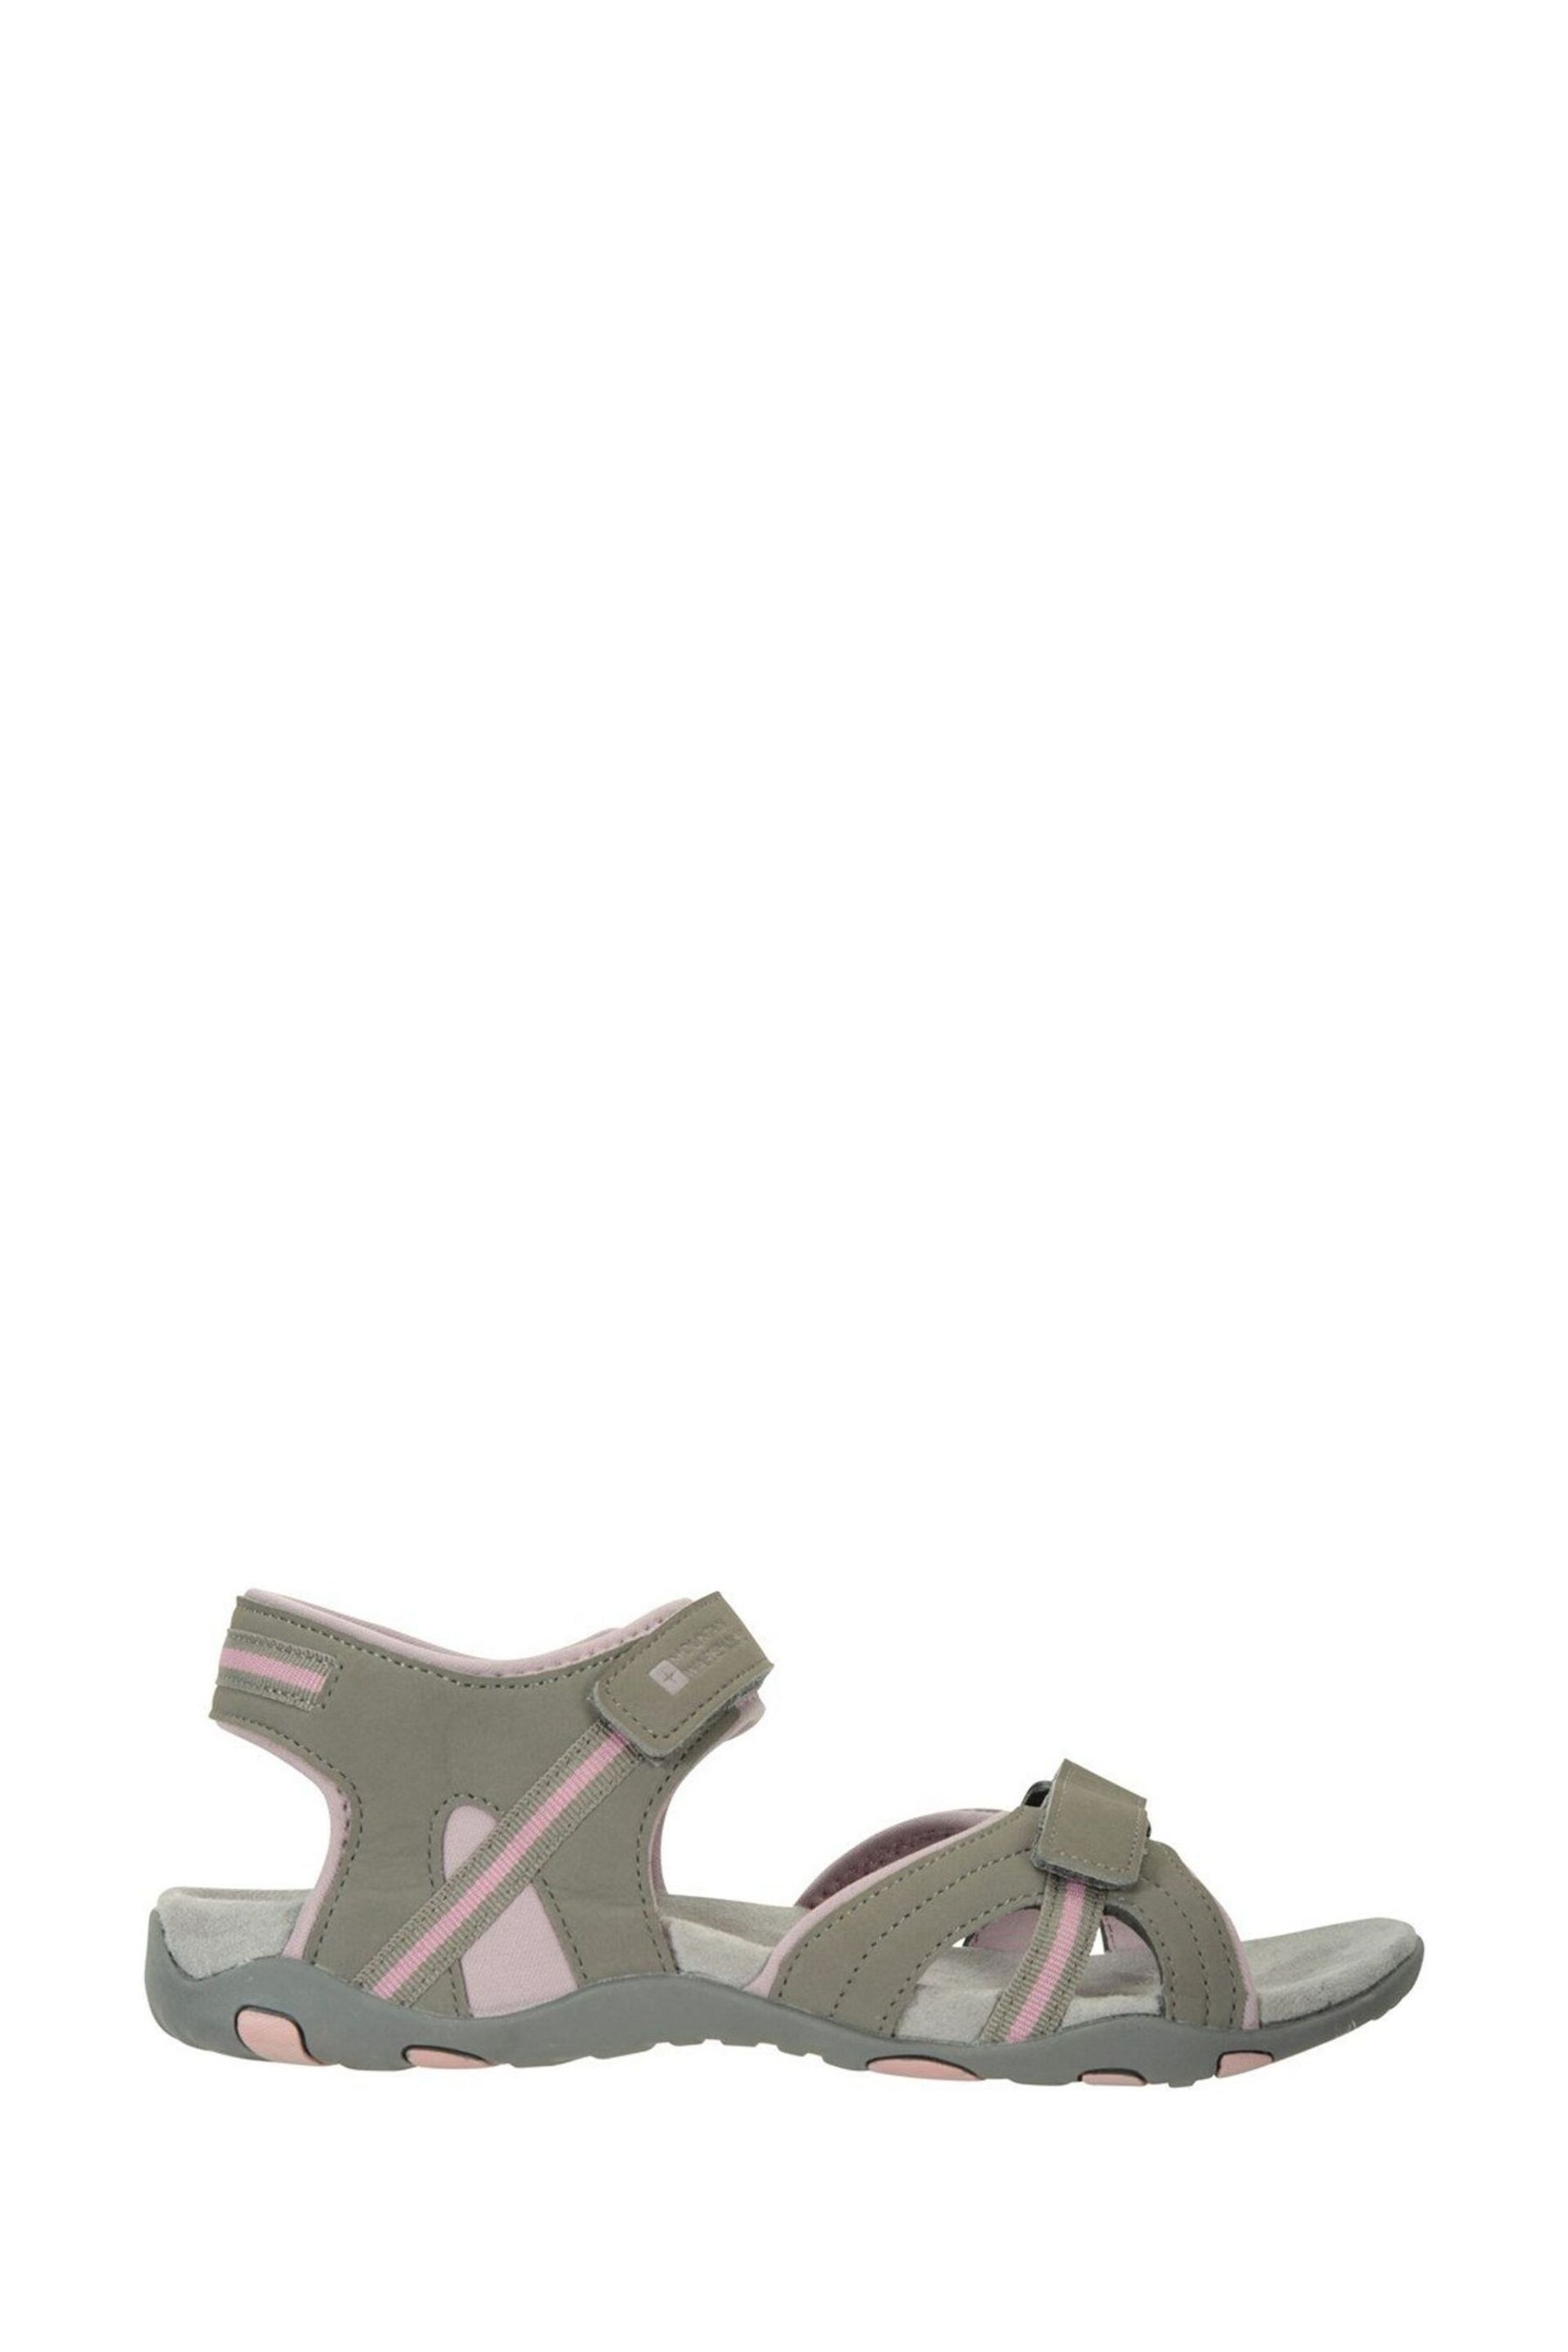 Mountain Warehouse Pink Oia Womens Summer Walking Sandals - Image 1 of 4